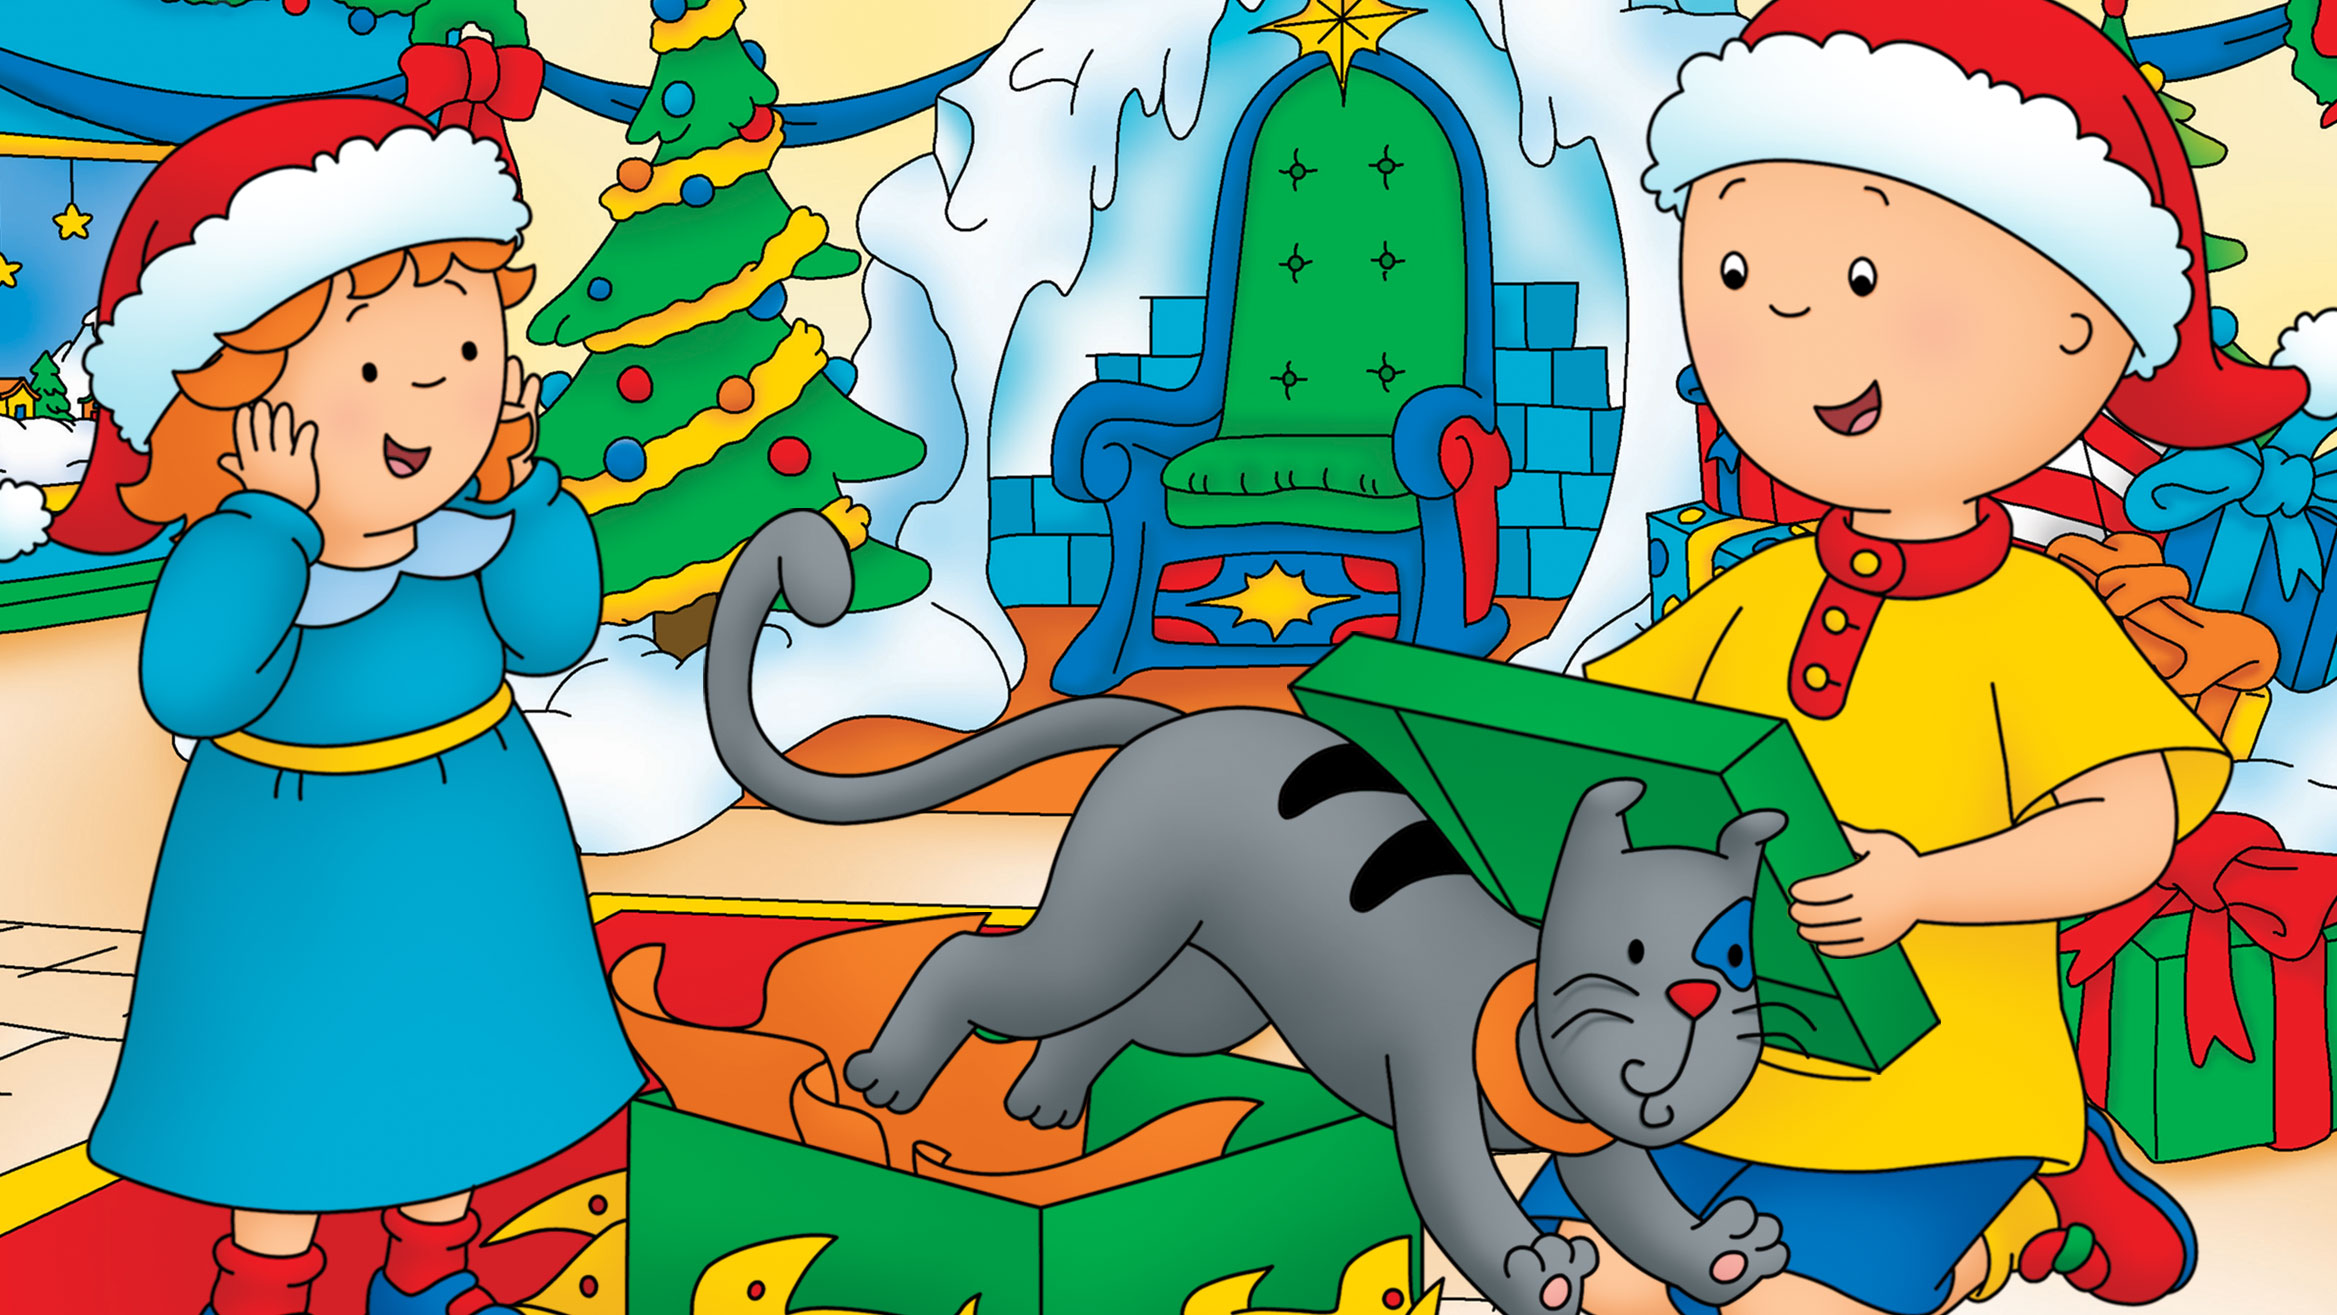 Caillou Celebrates The Holidays with New Caillou Holiday Toy Box Set! post image